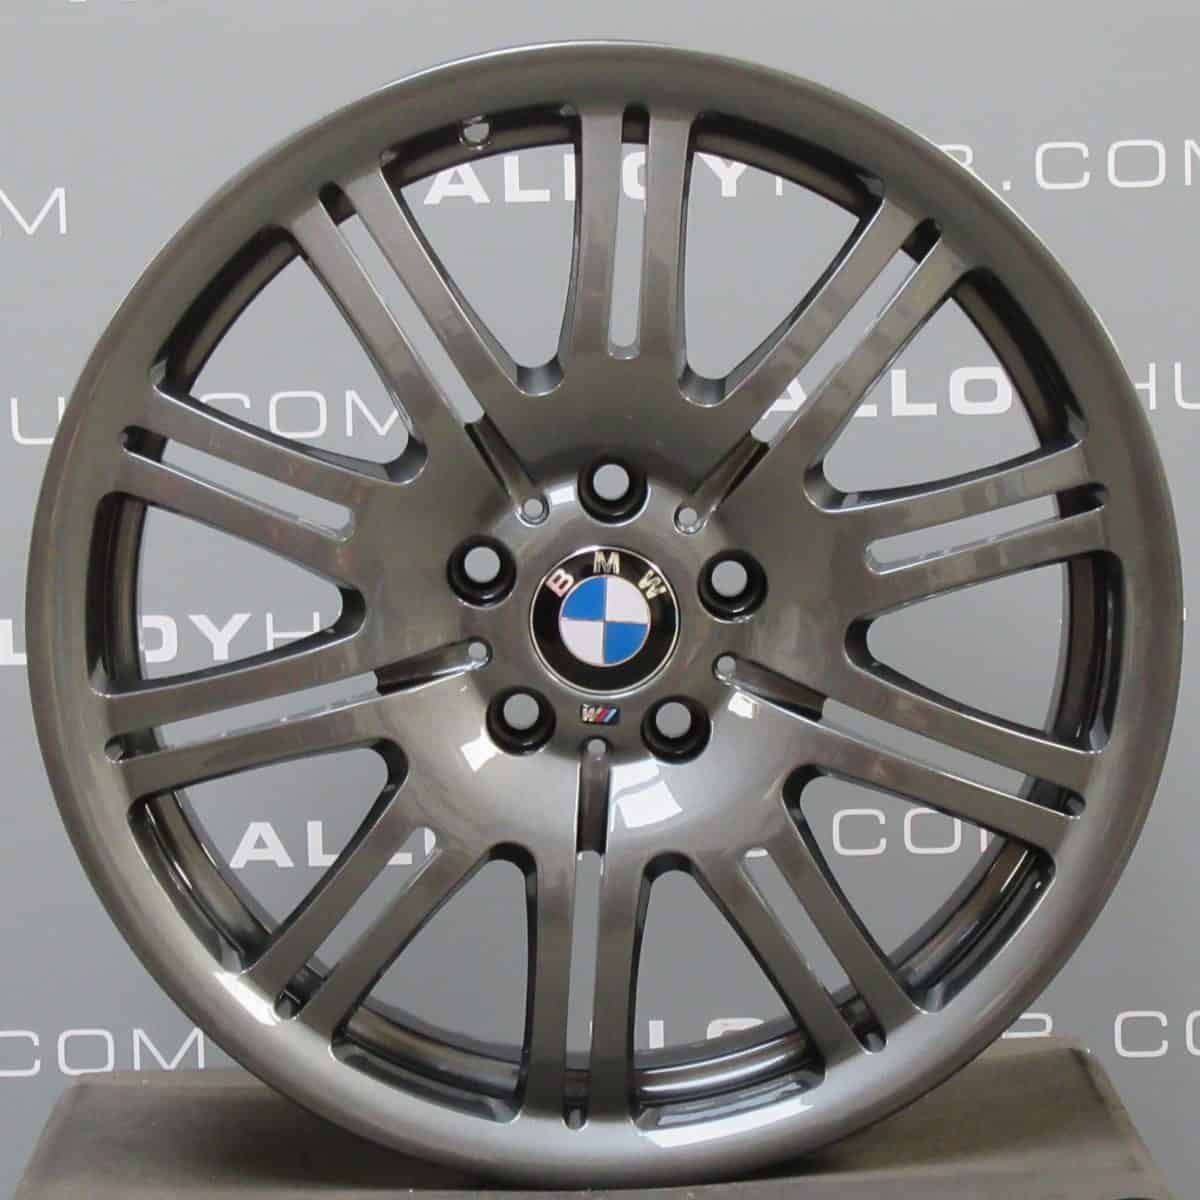 Genuine BMW M3 E46 Style 67M Sport 10 Double Spoke 19" inch Alloy Wheels with Anthracite Grey Finish 36112229650 36112229660